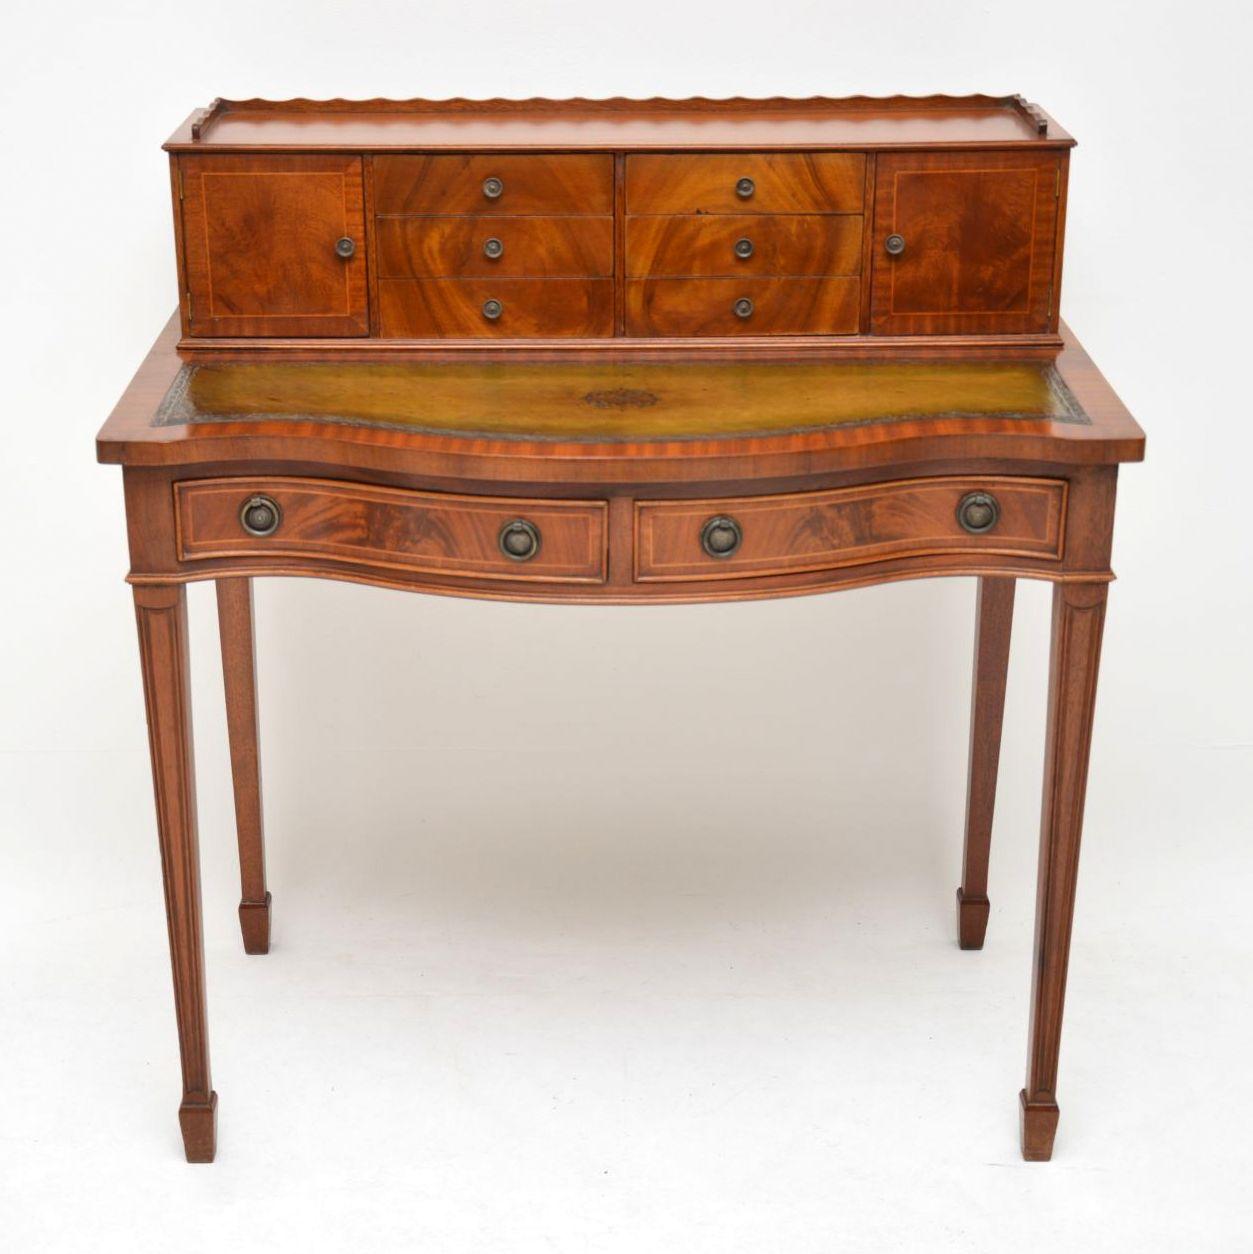 This antique Sheraton style flame mahogany writing table is in excellent condition and dates to around the 1950s period. It has a serpentine shaped front with two drawers and a high superstructure with cupboards and small drawers. The flame mahogany